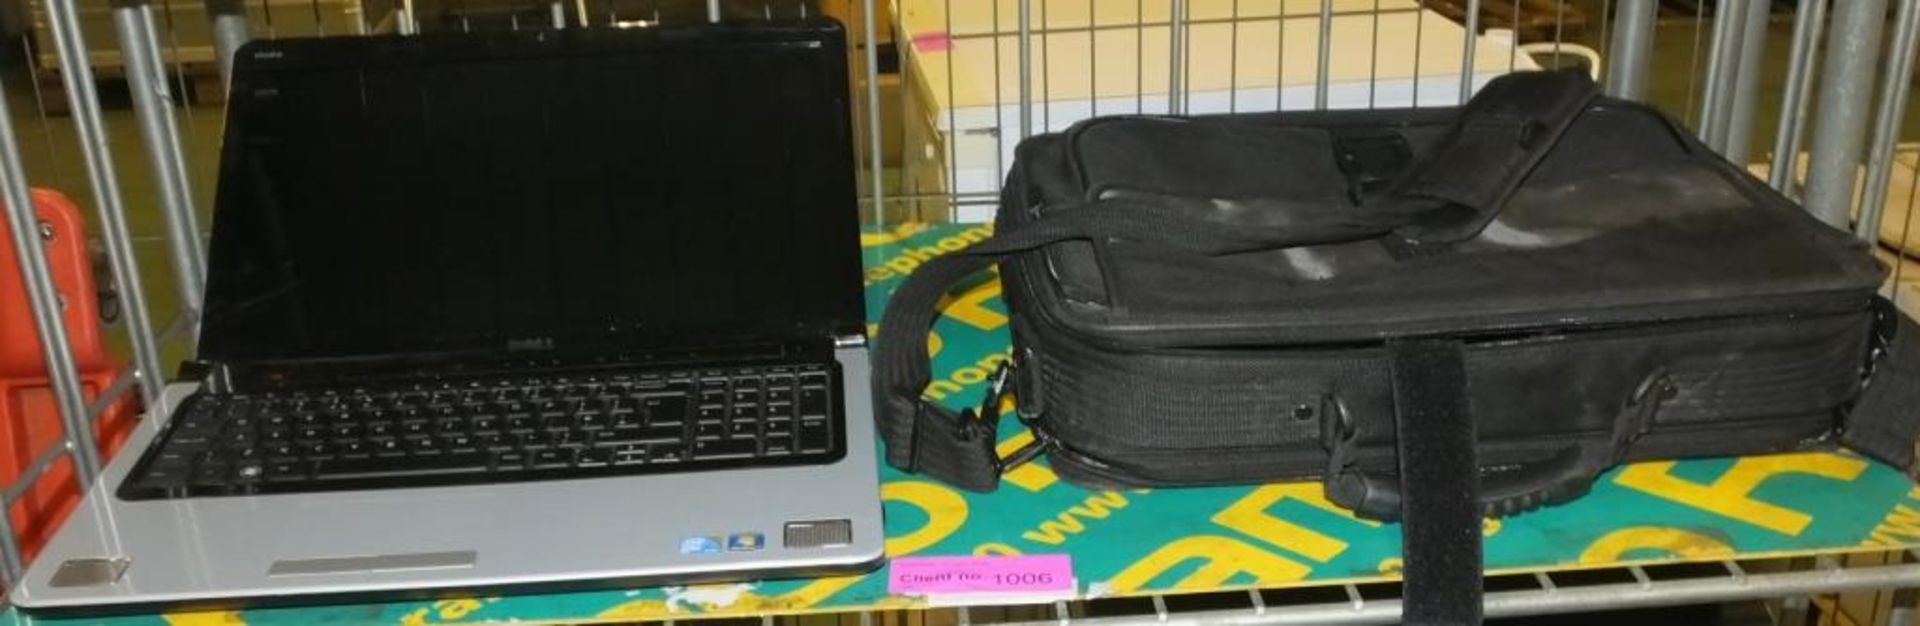 Dell Laptop with carry case